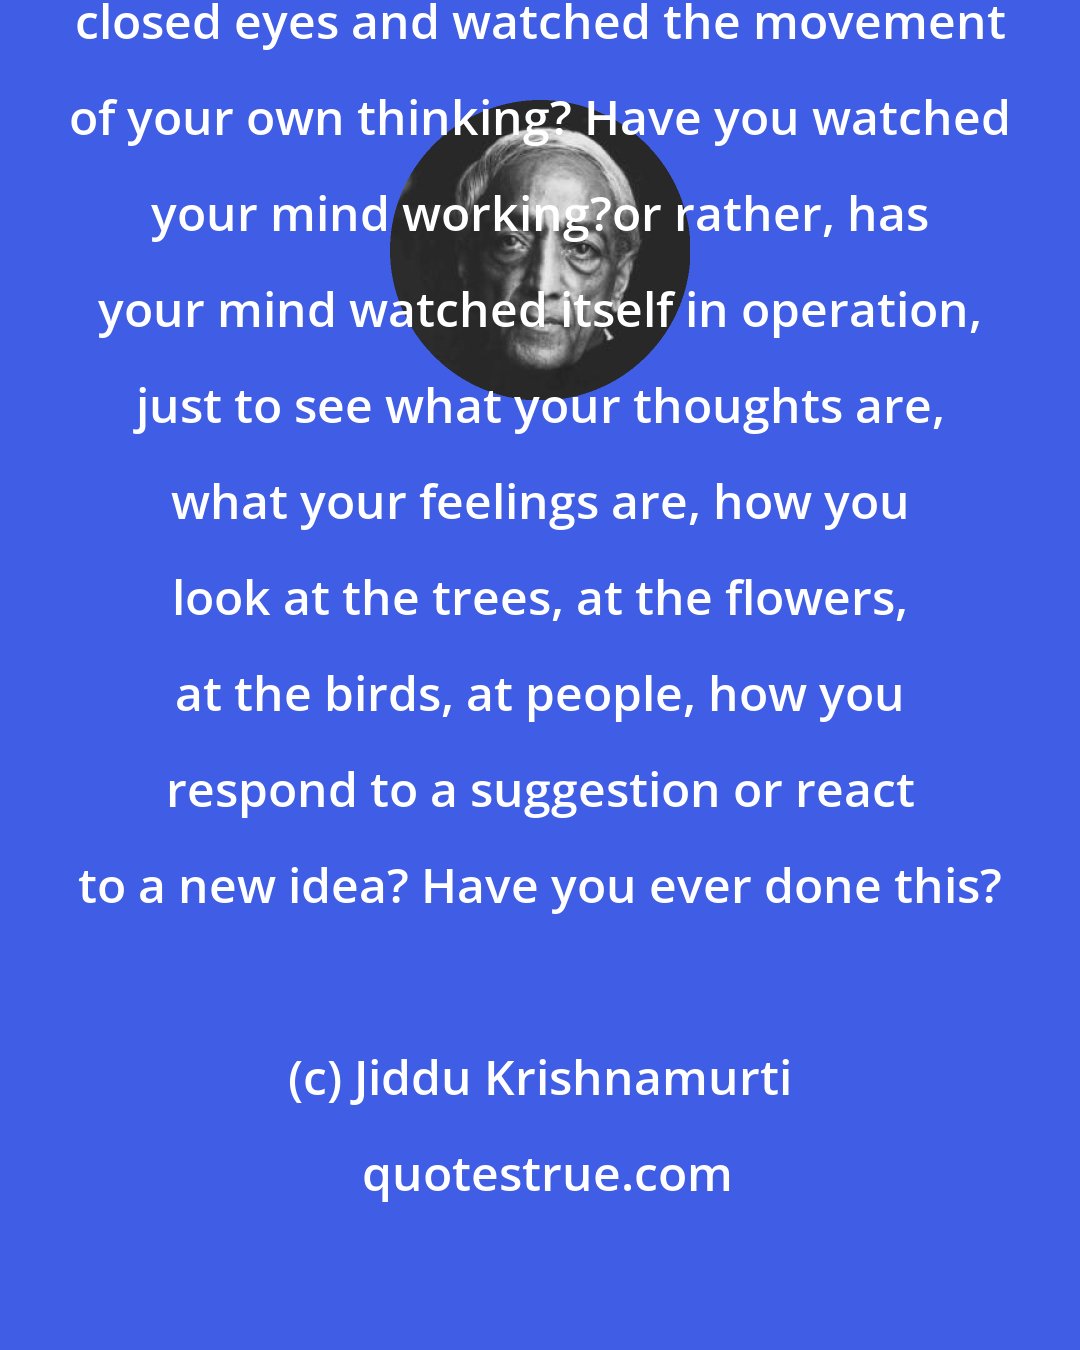 Jiddu Krishnamurti: Have you ever sat very quietly with closed eyes and watched the movement of your own thinking? Have you watched your mind working?or rather, has your mind watched itself in operation, just to see what your thoughts are, what your feelings are, how you look at the trees, at the flowers, at the birds, at people, how you respond to a suggestion or react to a new idea? Have you ever done this?